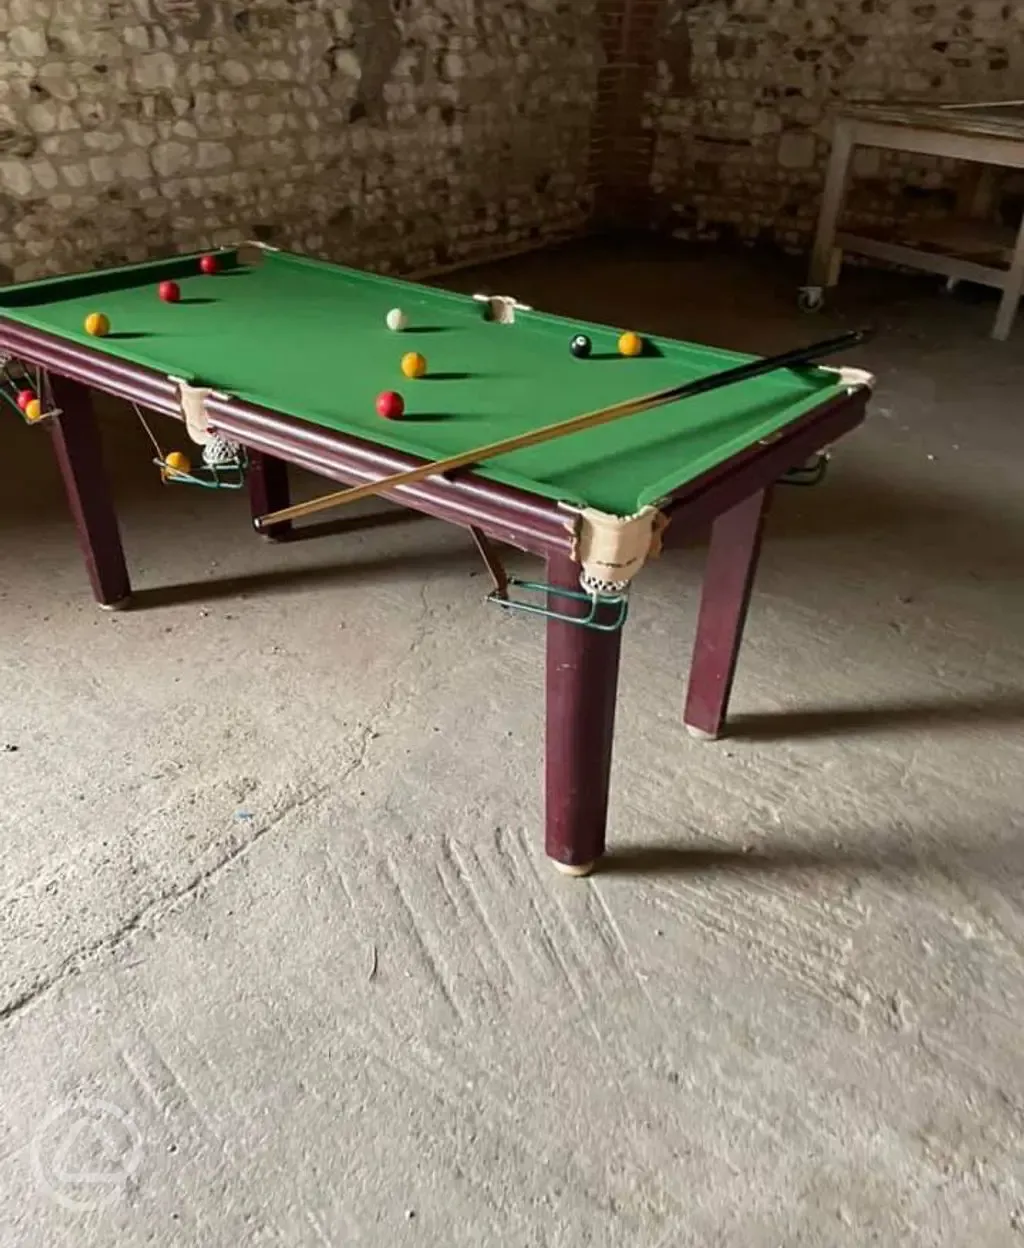 Pool in the games room 